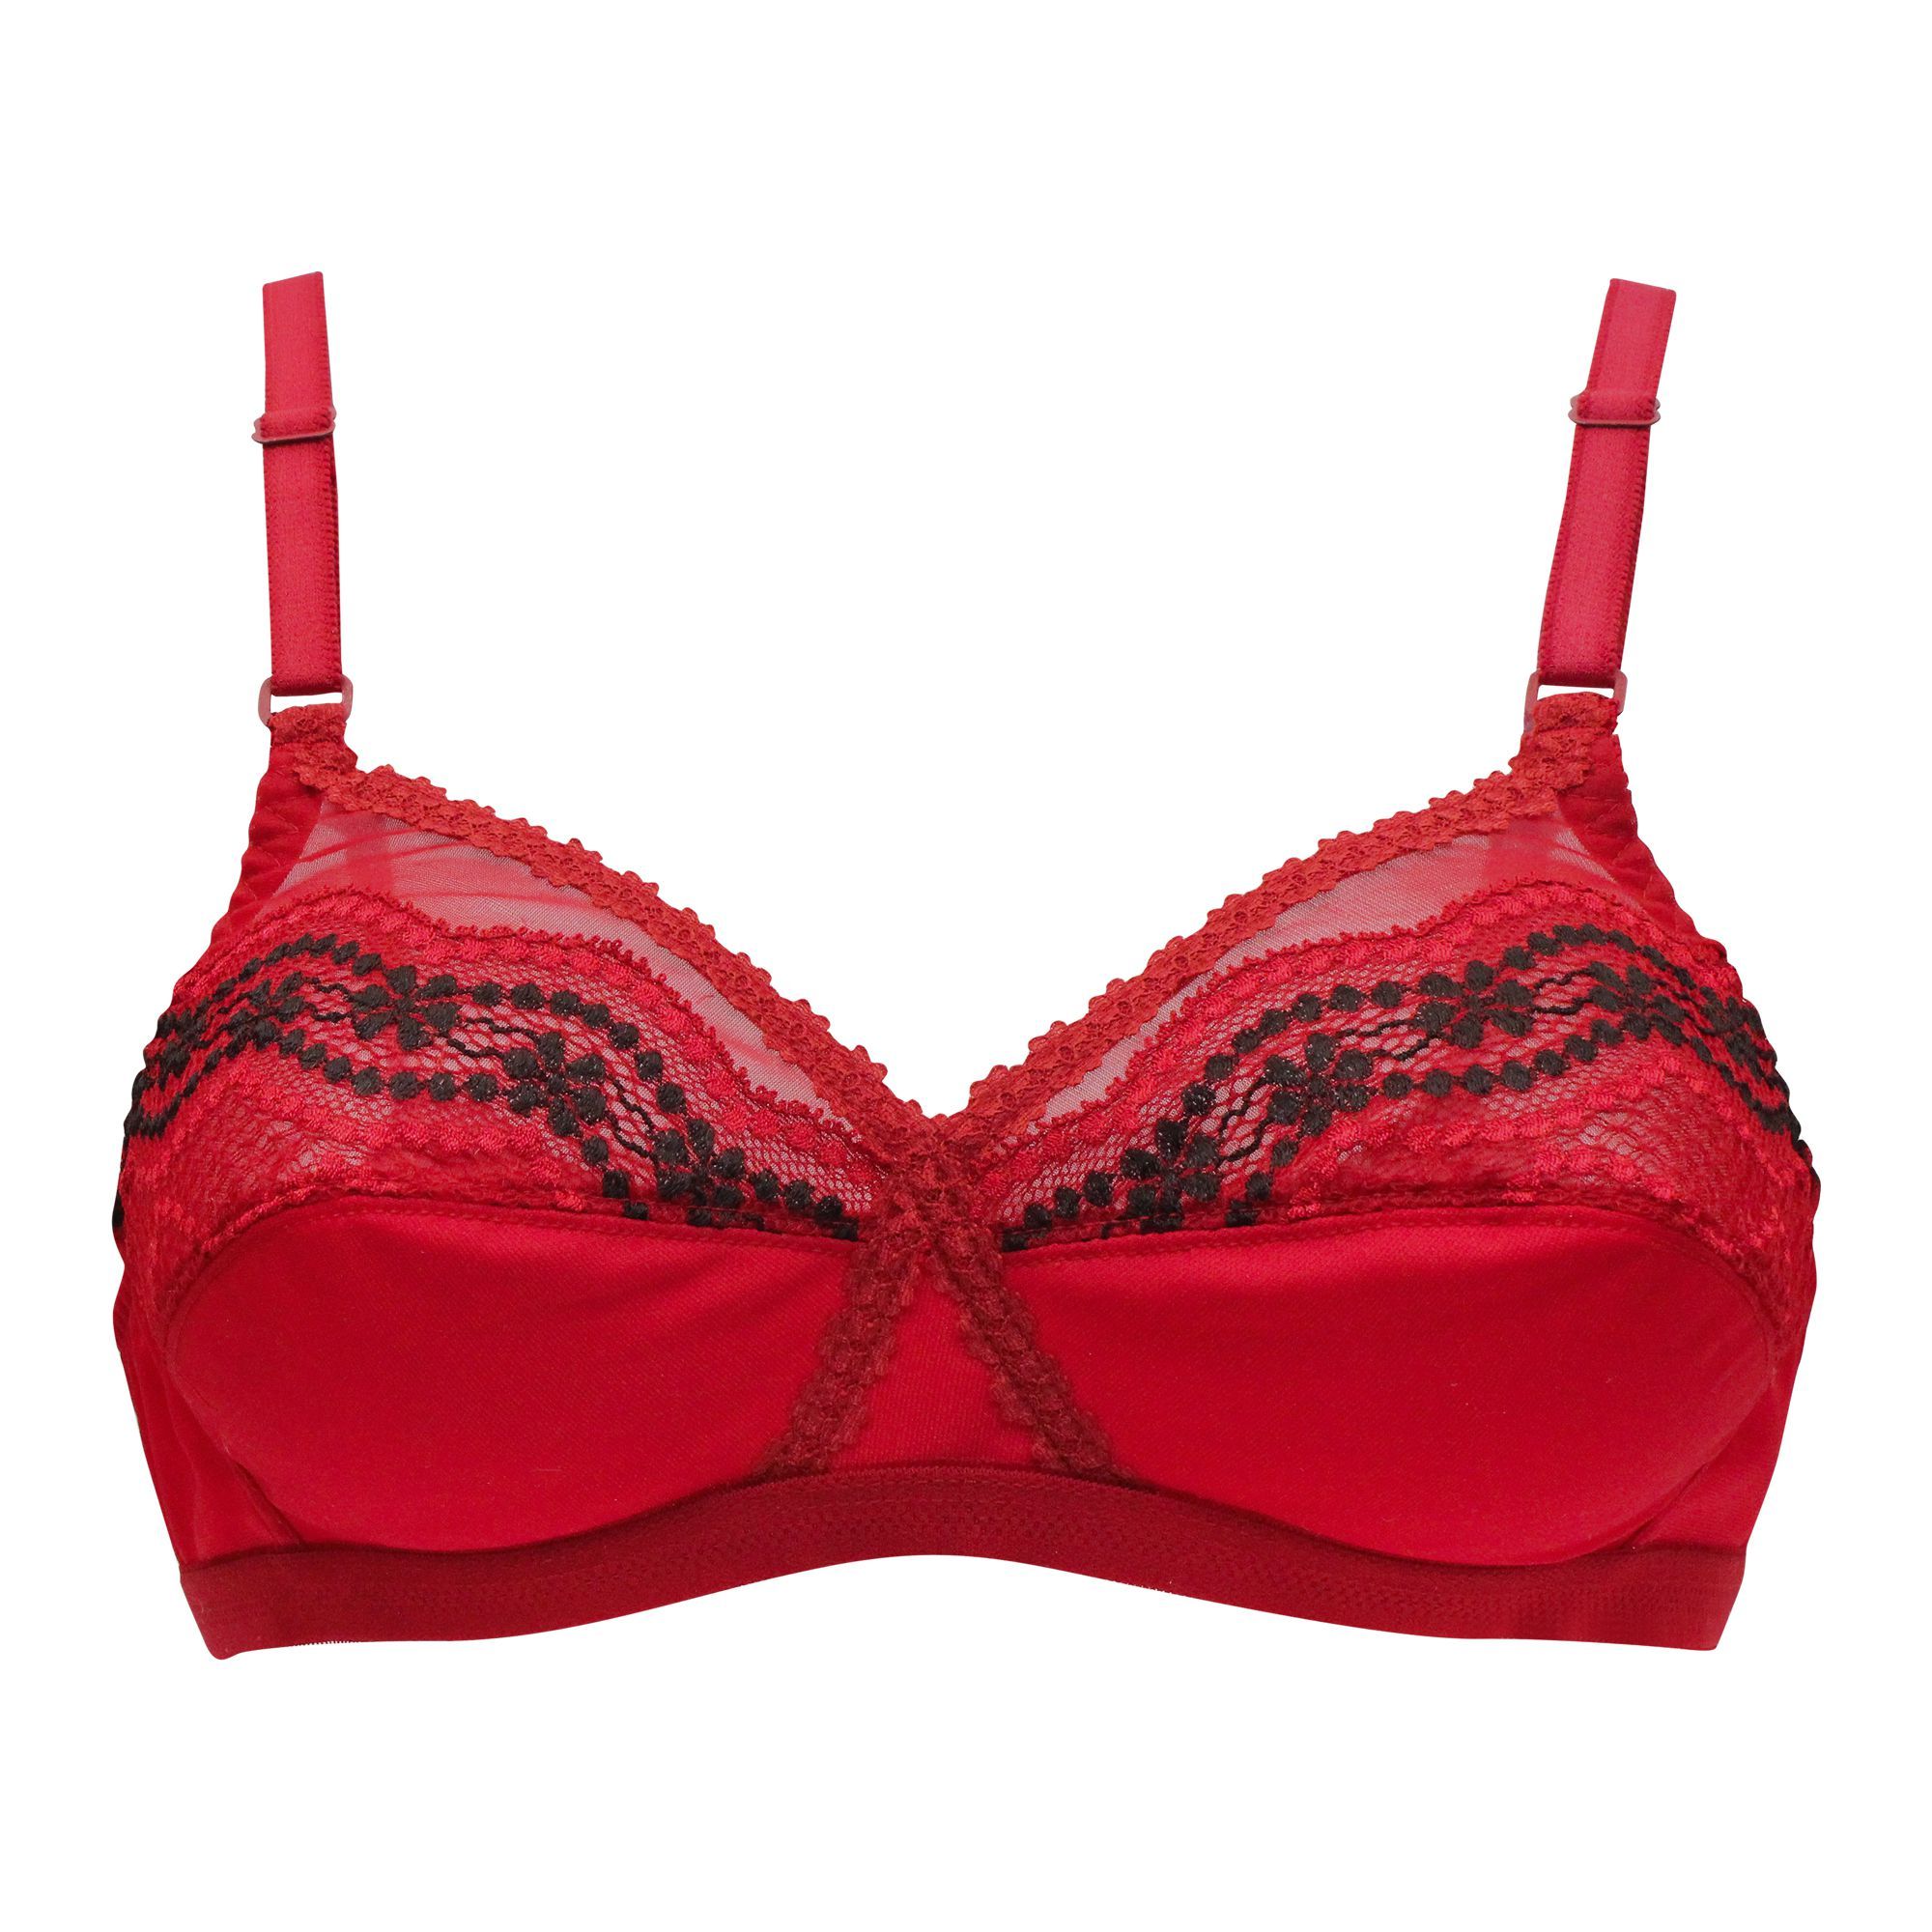 Purchase IFG Mystique N Bra, Maroon Online at Special Price in